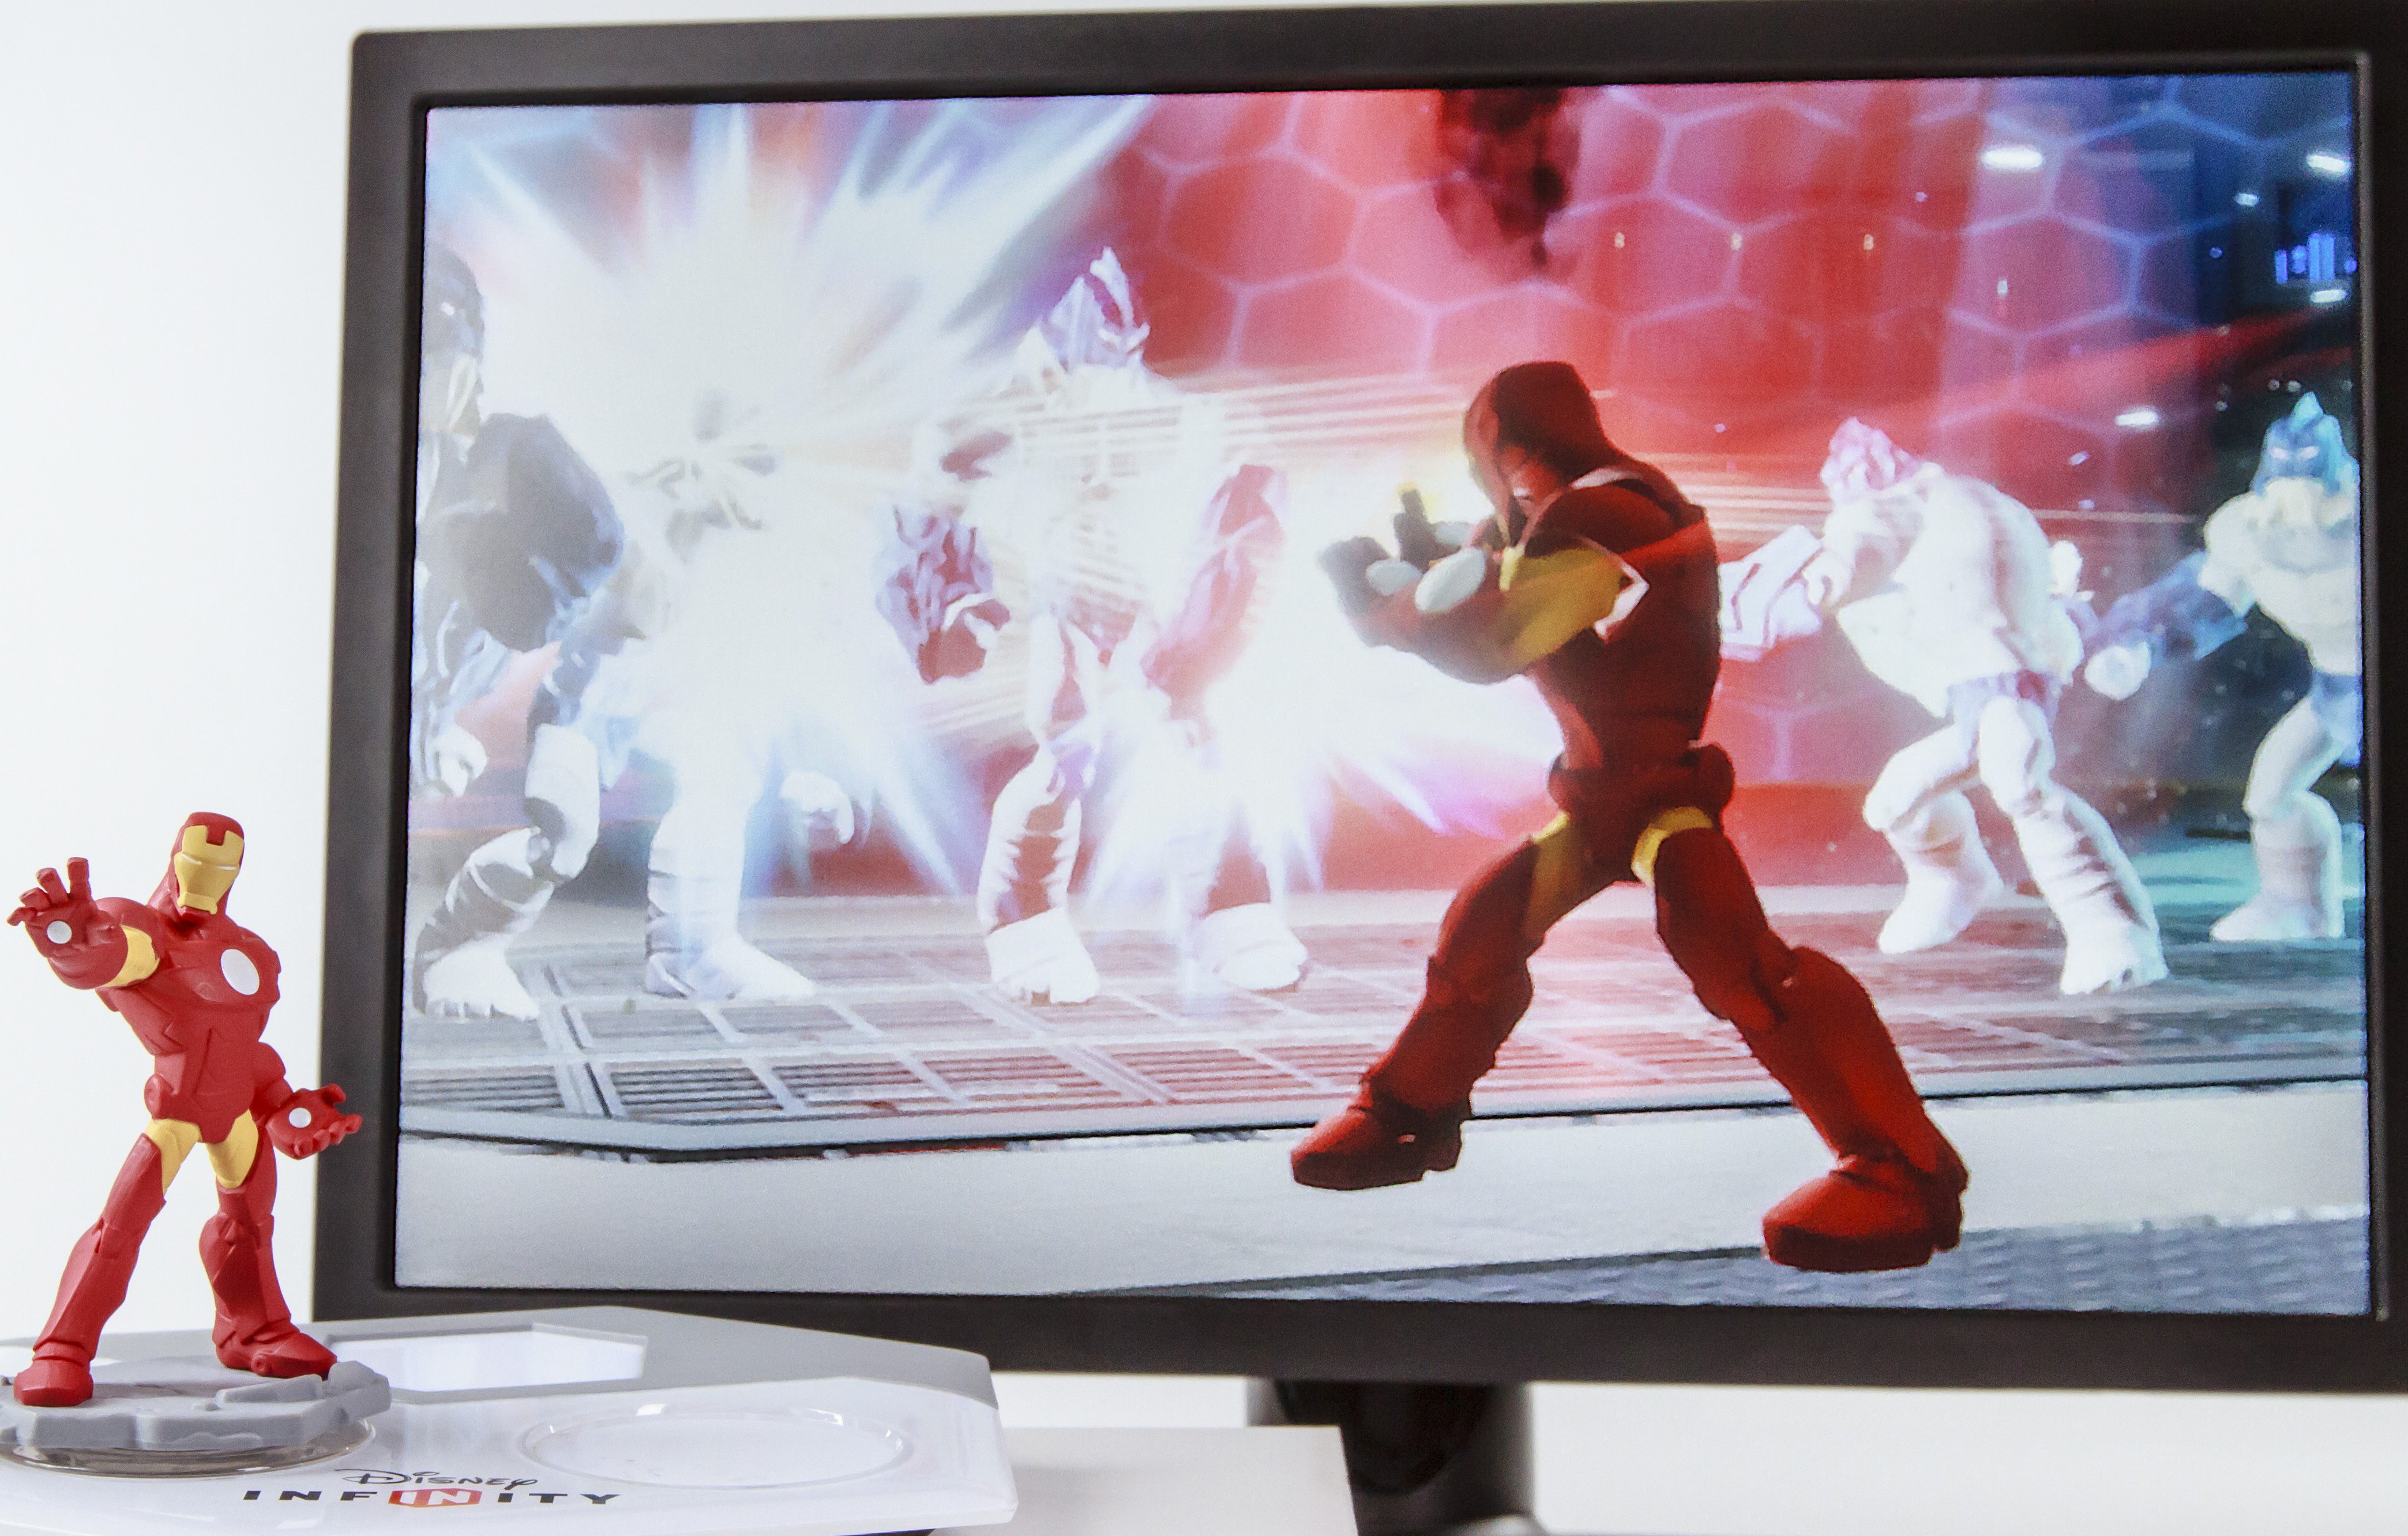 DISNEY INFINITY 2.0: MARVEL SUPER HEROES Next chapter to last year’s hit video game – launches in Nordic retail stores today